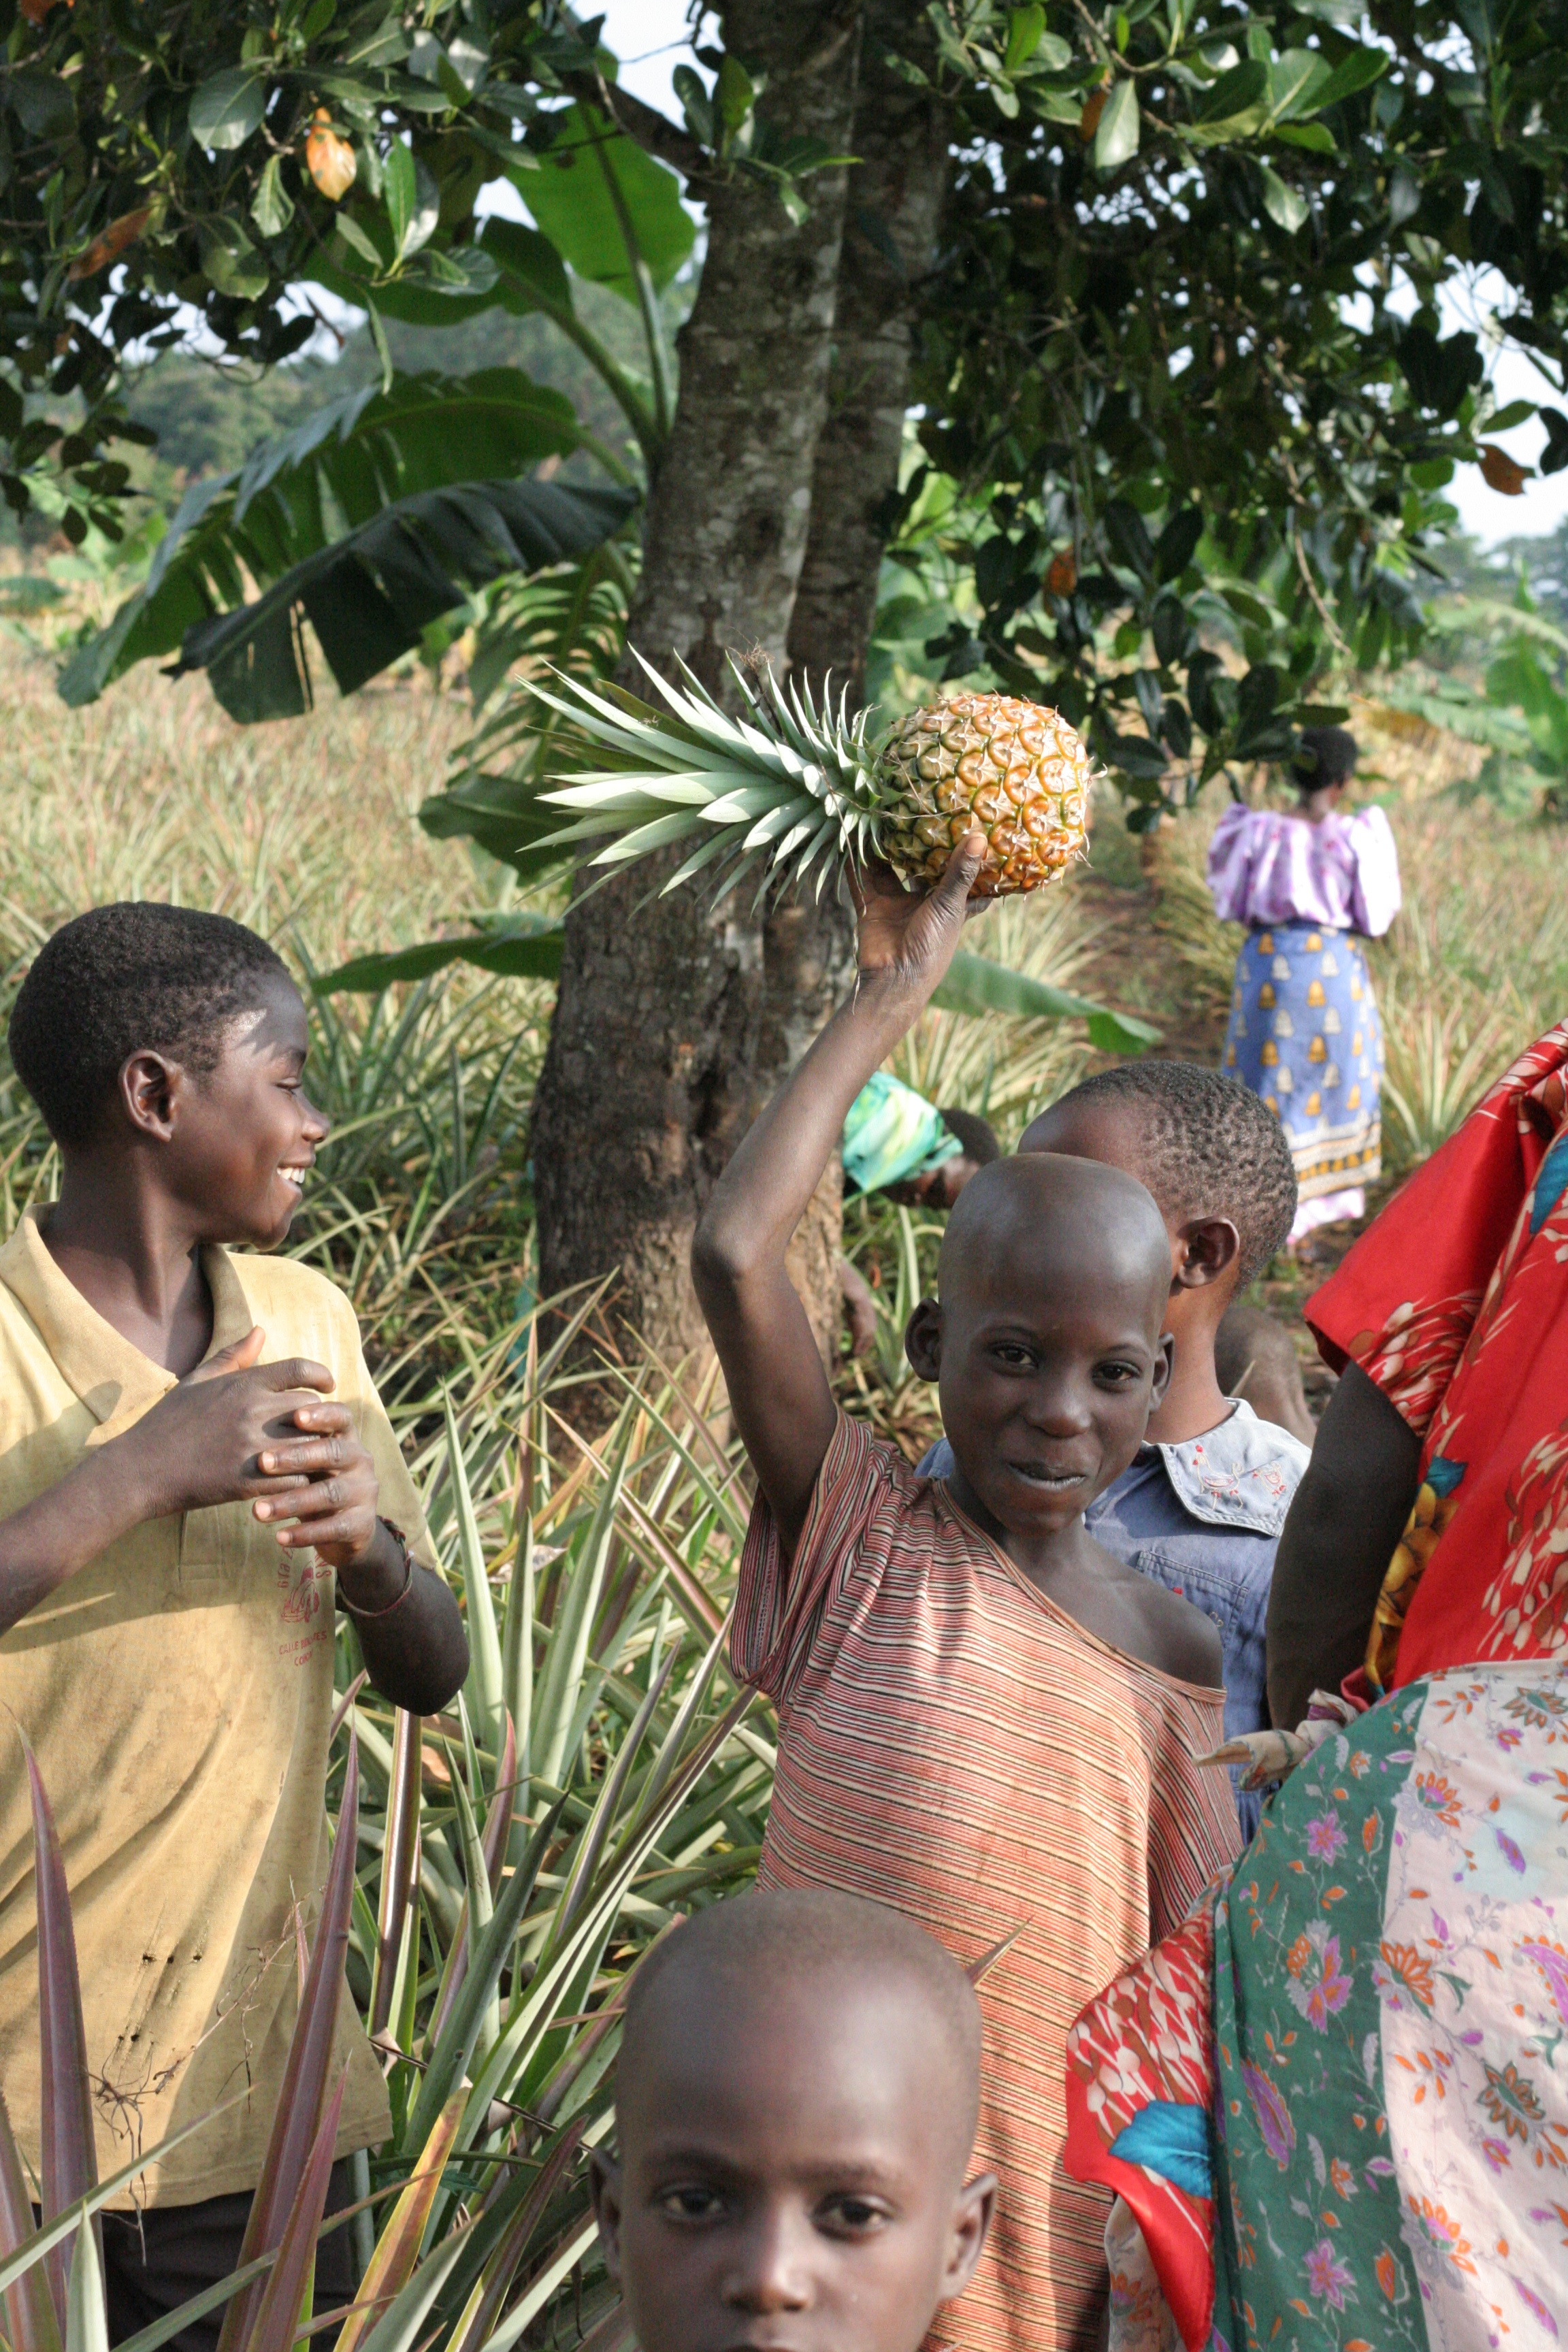 Kids smiling, one holding a pineapple up